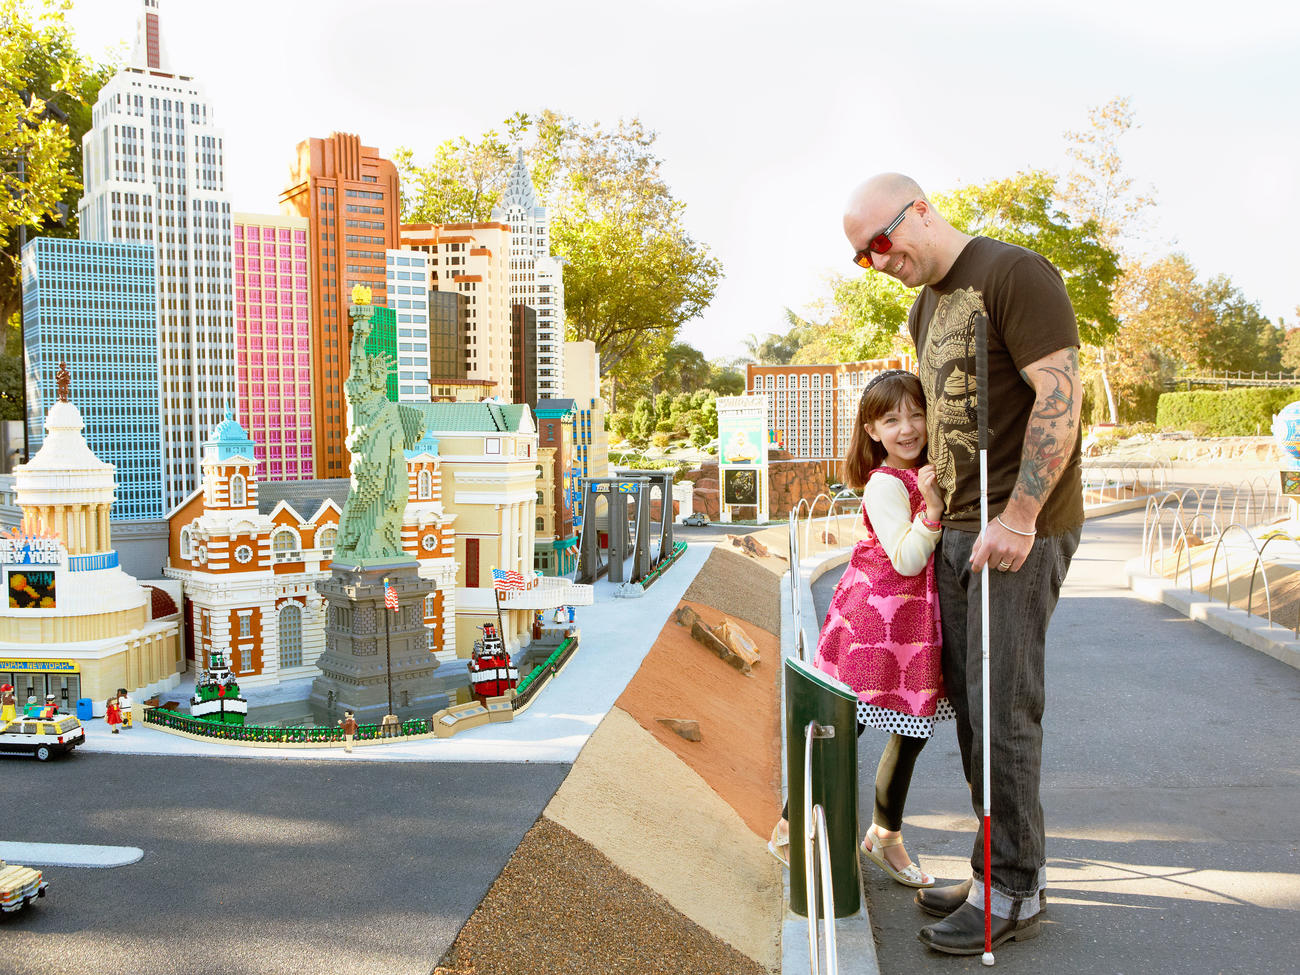 Show and Tell in Legoland California